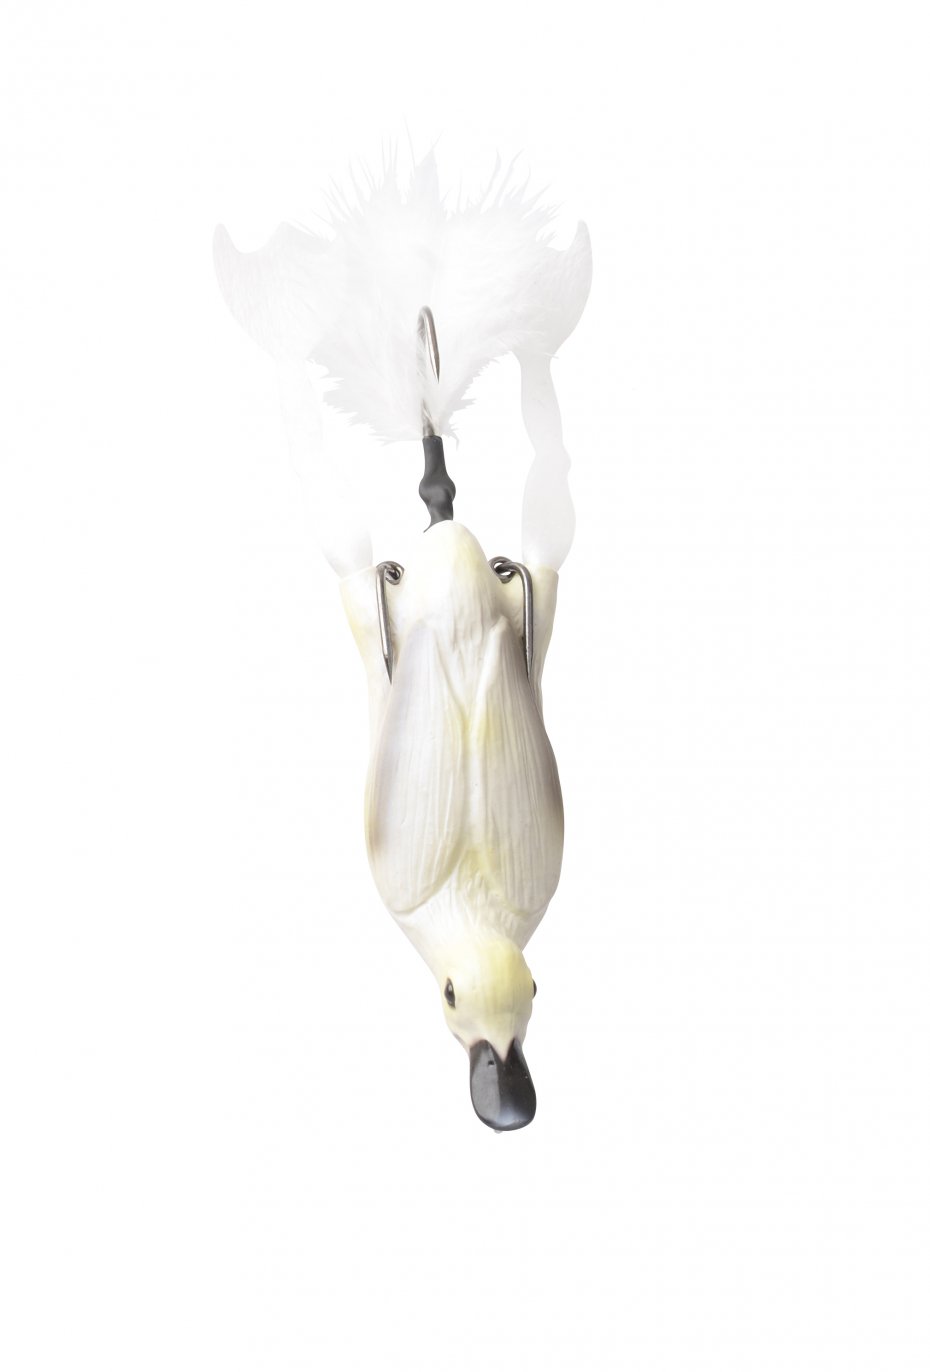 Savage Gear 3D Hollow Duckling weedless S 7.5cm White